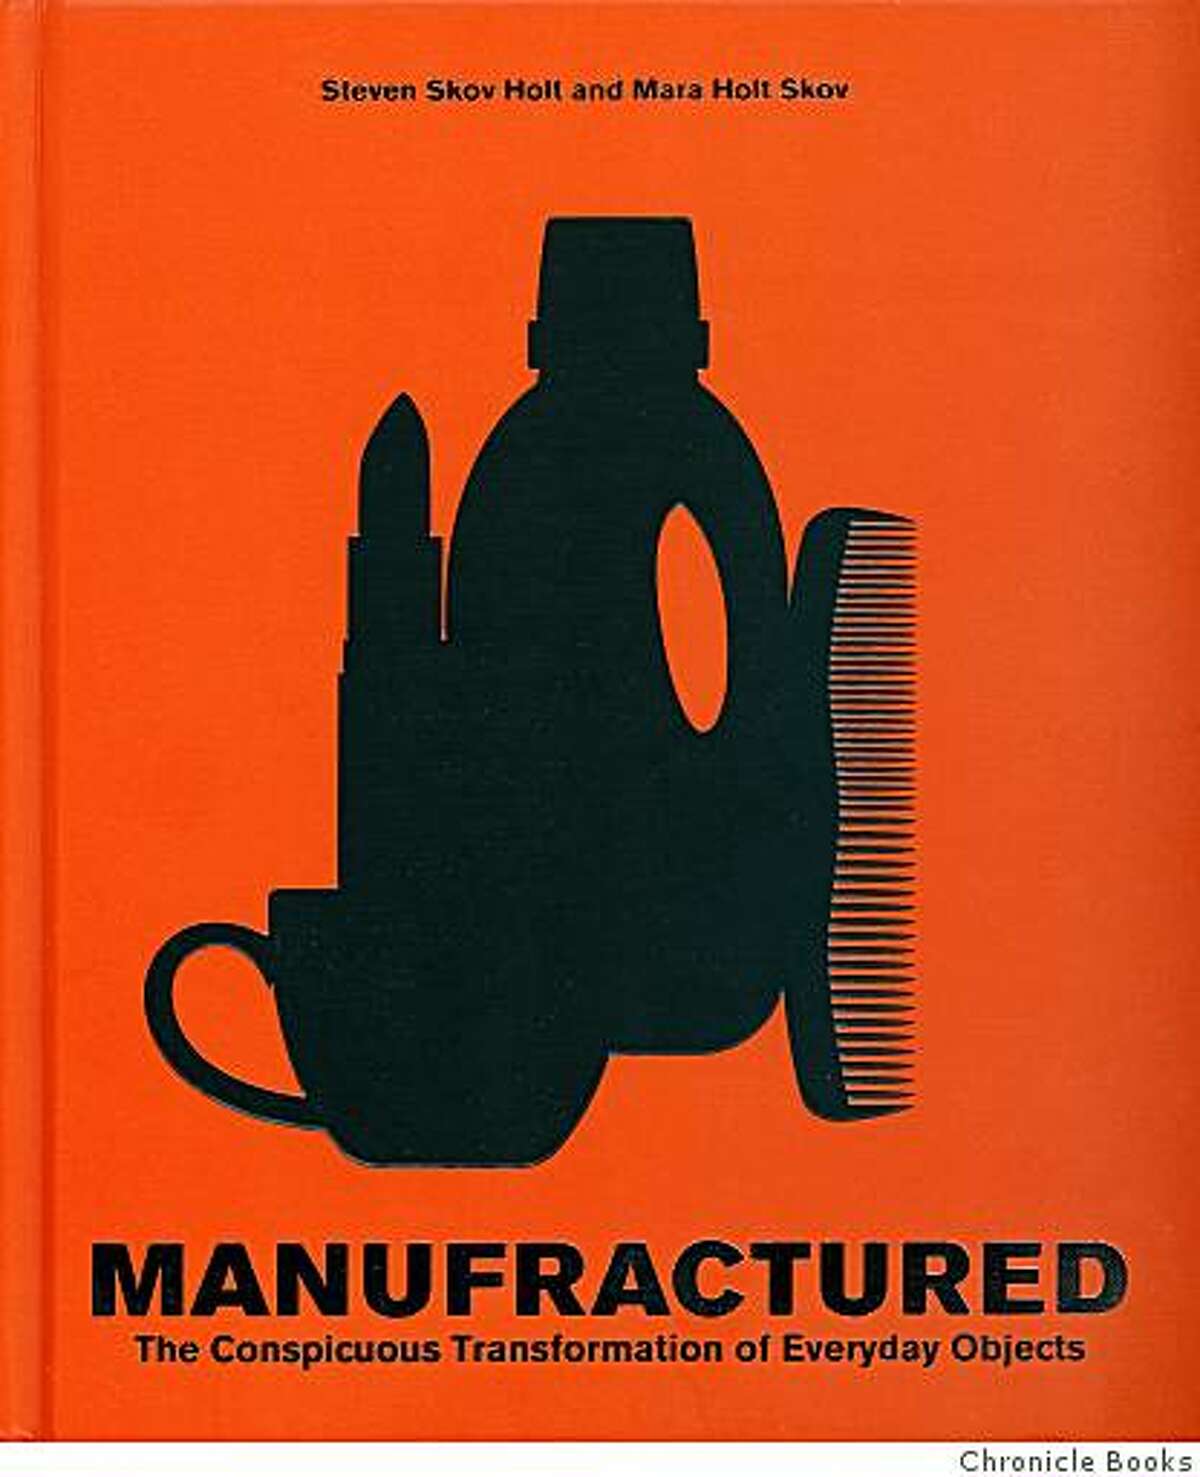 Manufractured, by Bay Area authors Steven Skov Holt and Mara Holt Skov, Chronicle Books, $35, describes how mass manufactured objects are reused as raw material for usable crafts instead of joining the wastestream or becoming landfill.